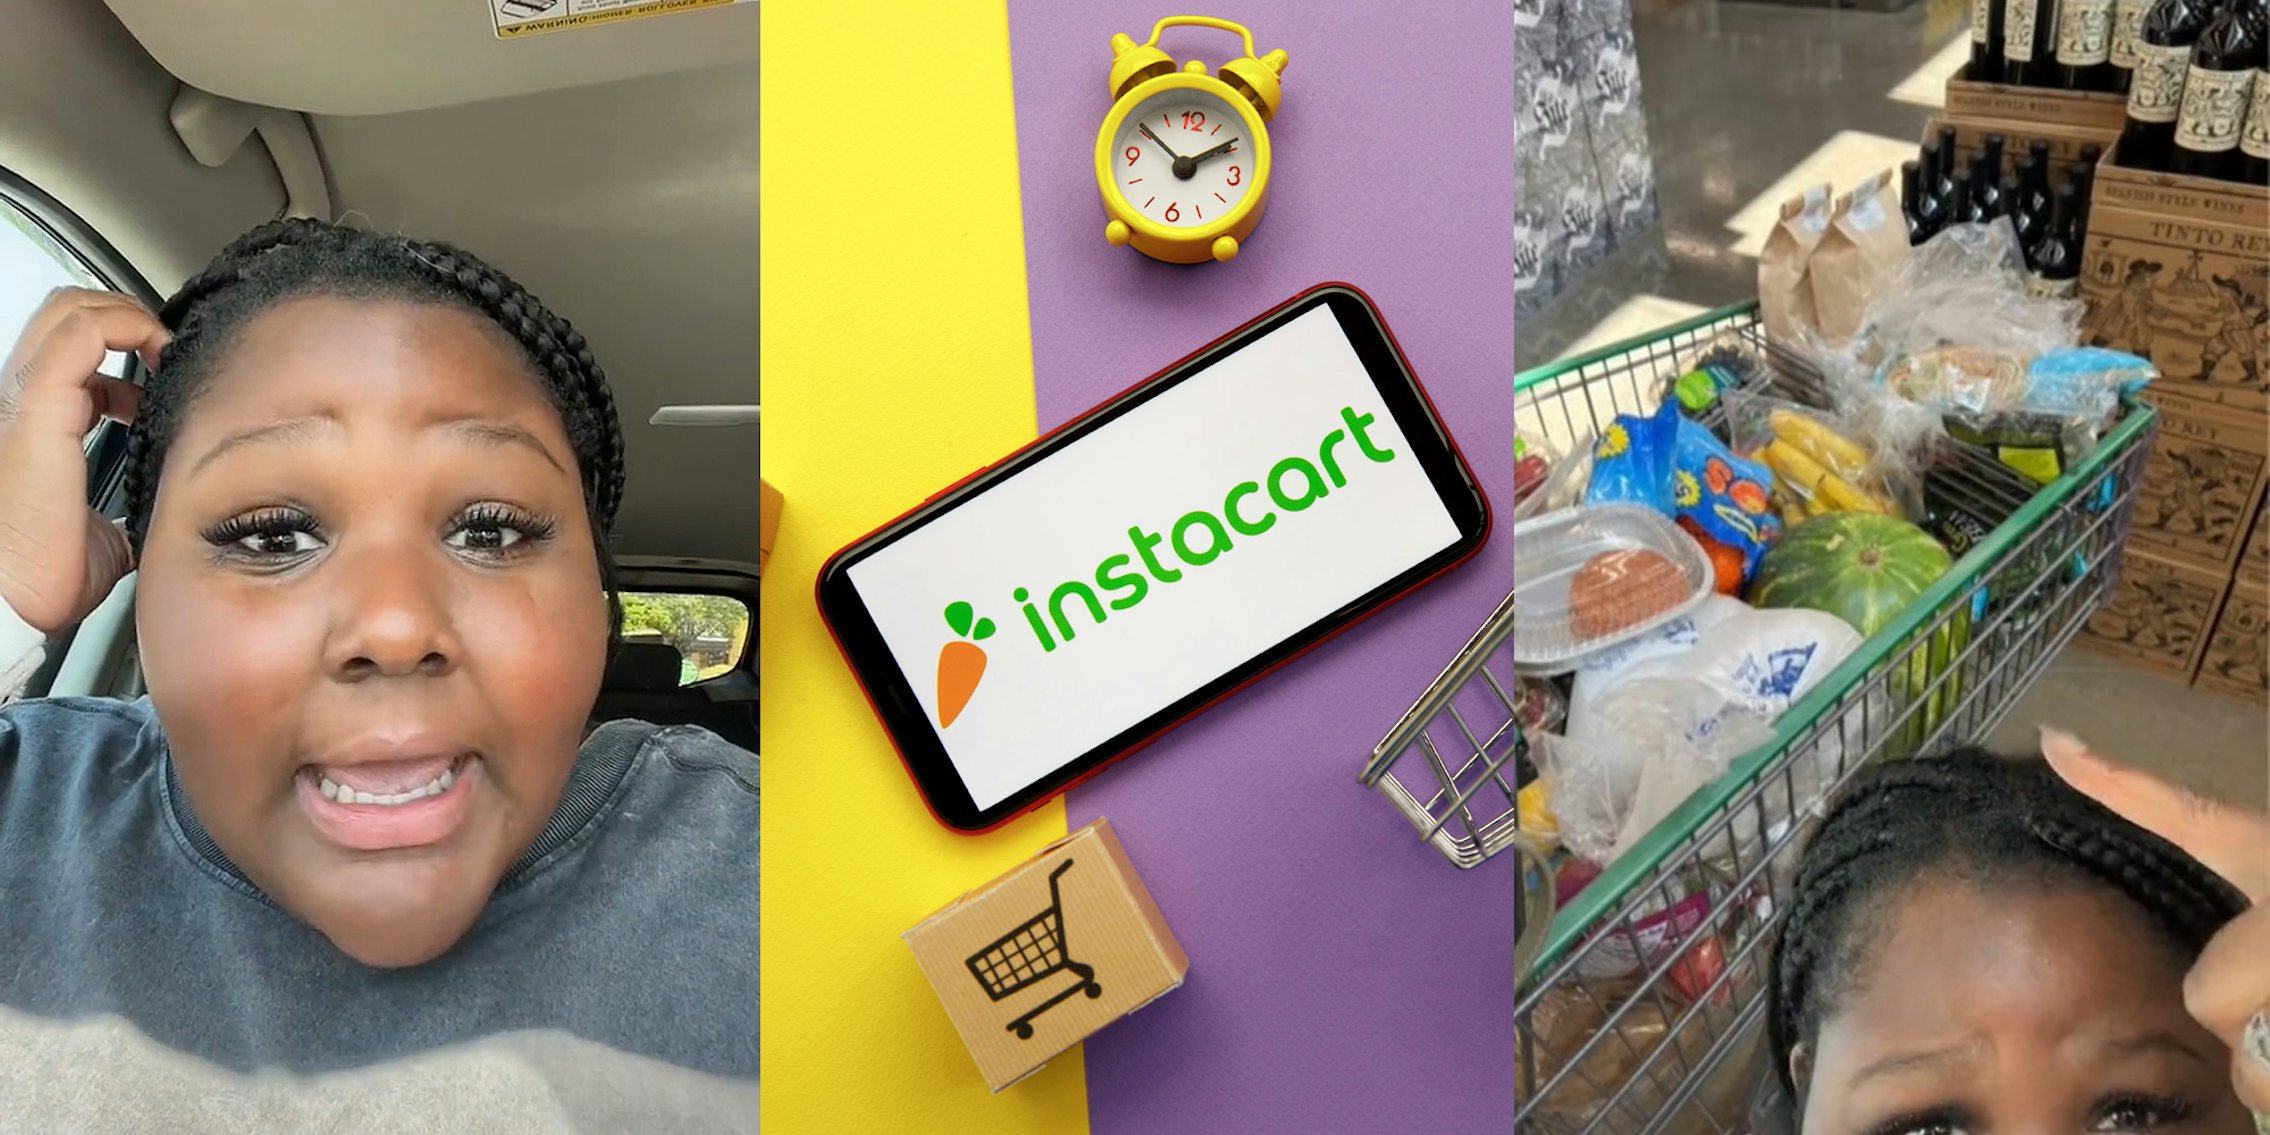 woman upset speaking in car (l) instacart logo on phone phone yellow clock shopping cart wooden block mini shopping cart on yellow and purple background (c) woman greenscreen tiktok pointing up to photo of full cart (r)